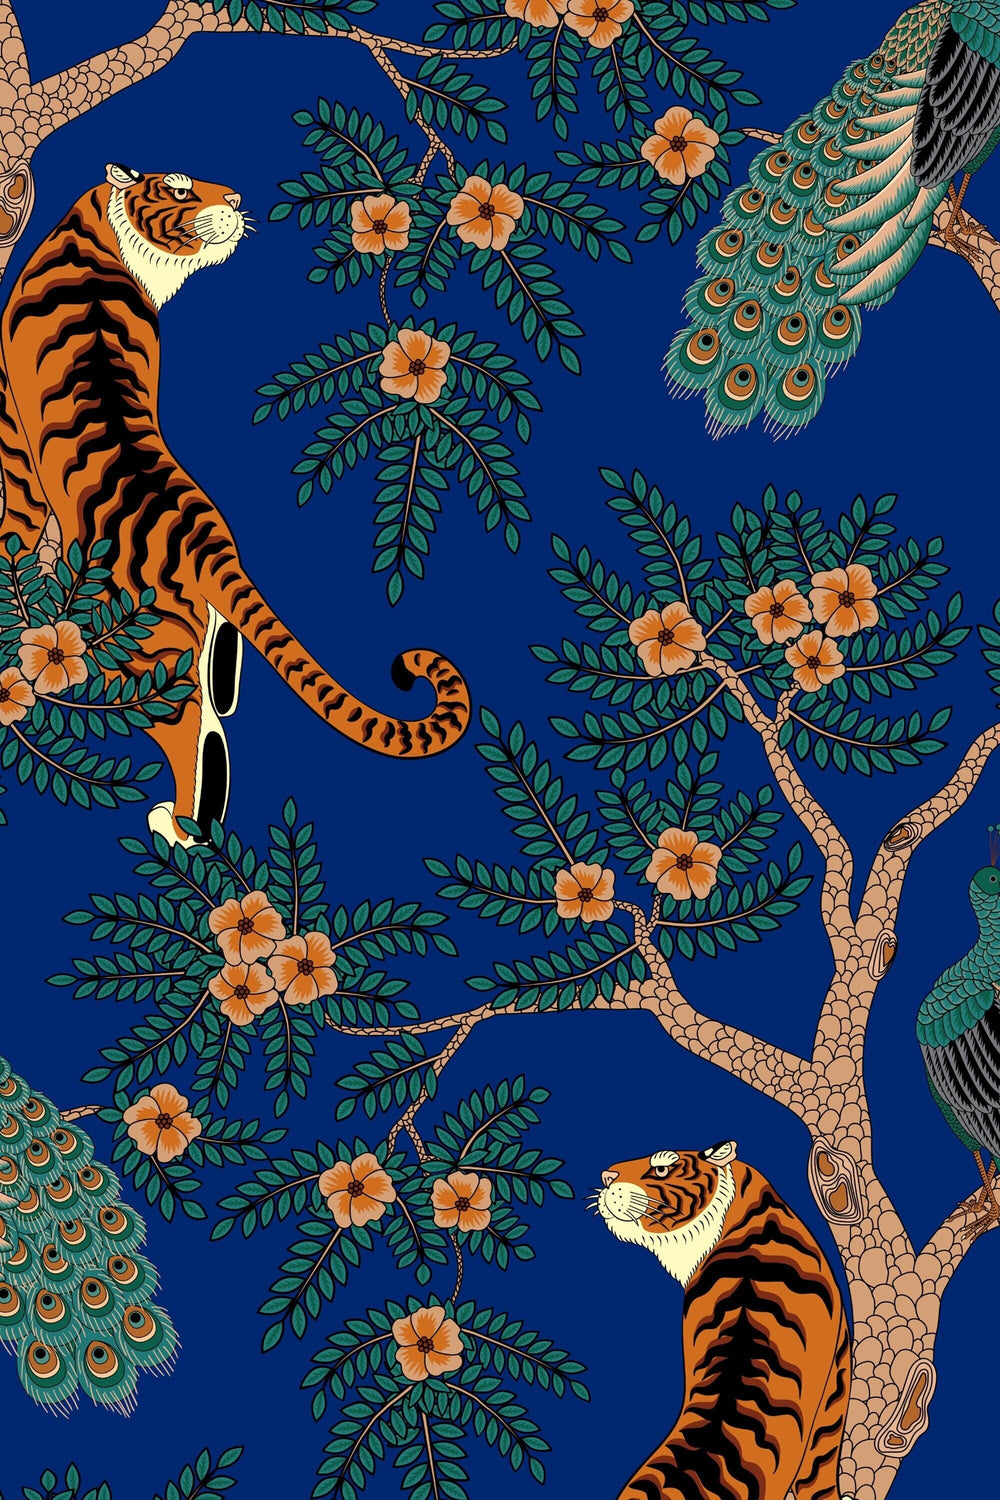 Tiger and Peacock in the woods on blue background - Peel & Stick Wallpaper - Removable Self Adhesive and traditional wallpaper #3182